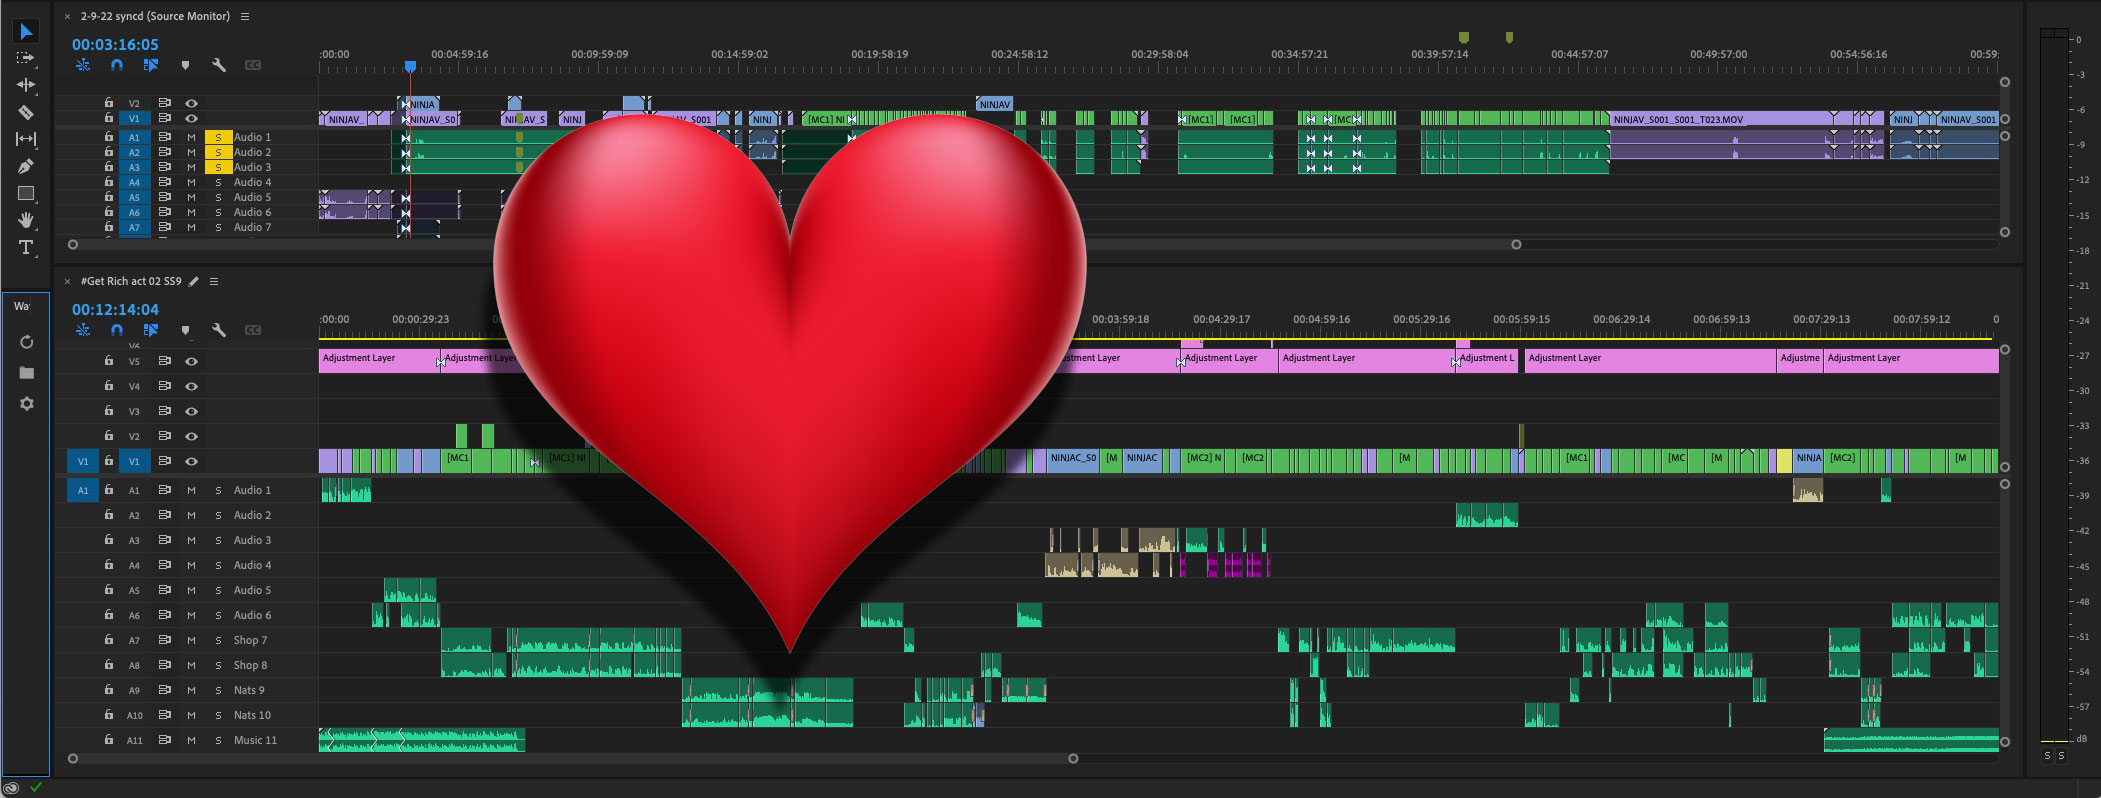 My single most loved feature in Adobe Premiere Pro 40